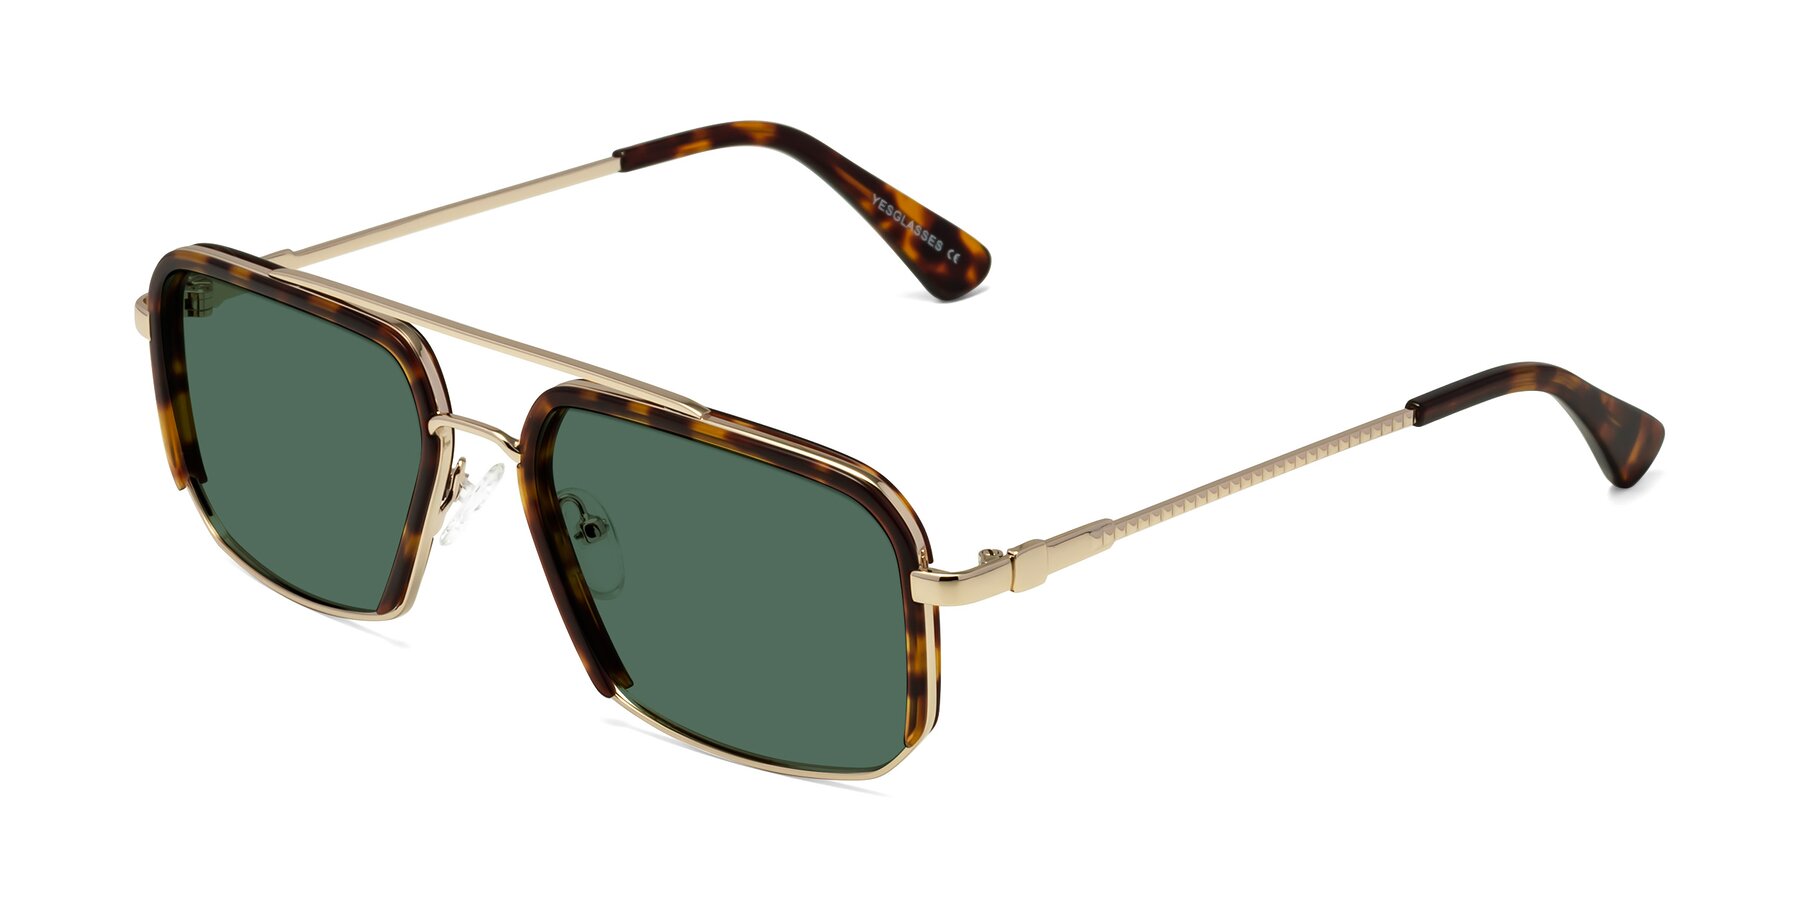 Angle of Dechter in Tortoise-Gold with Green Polarized Lenses